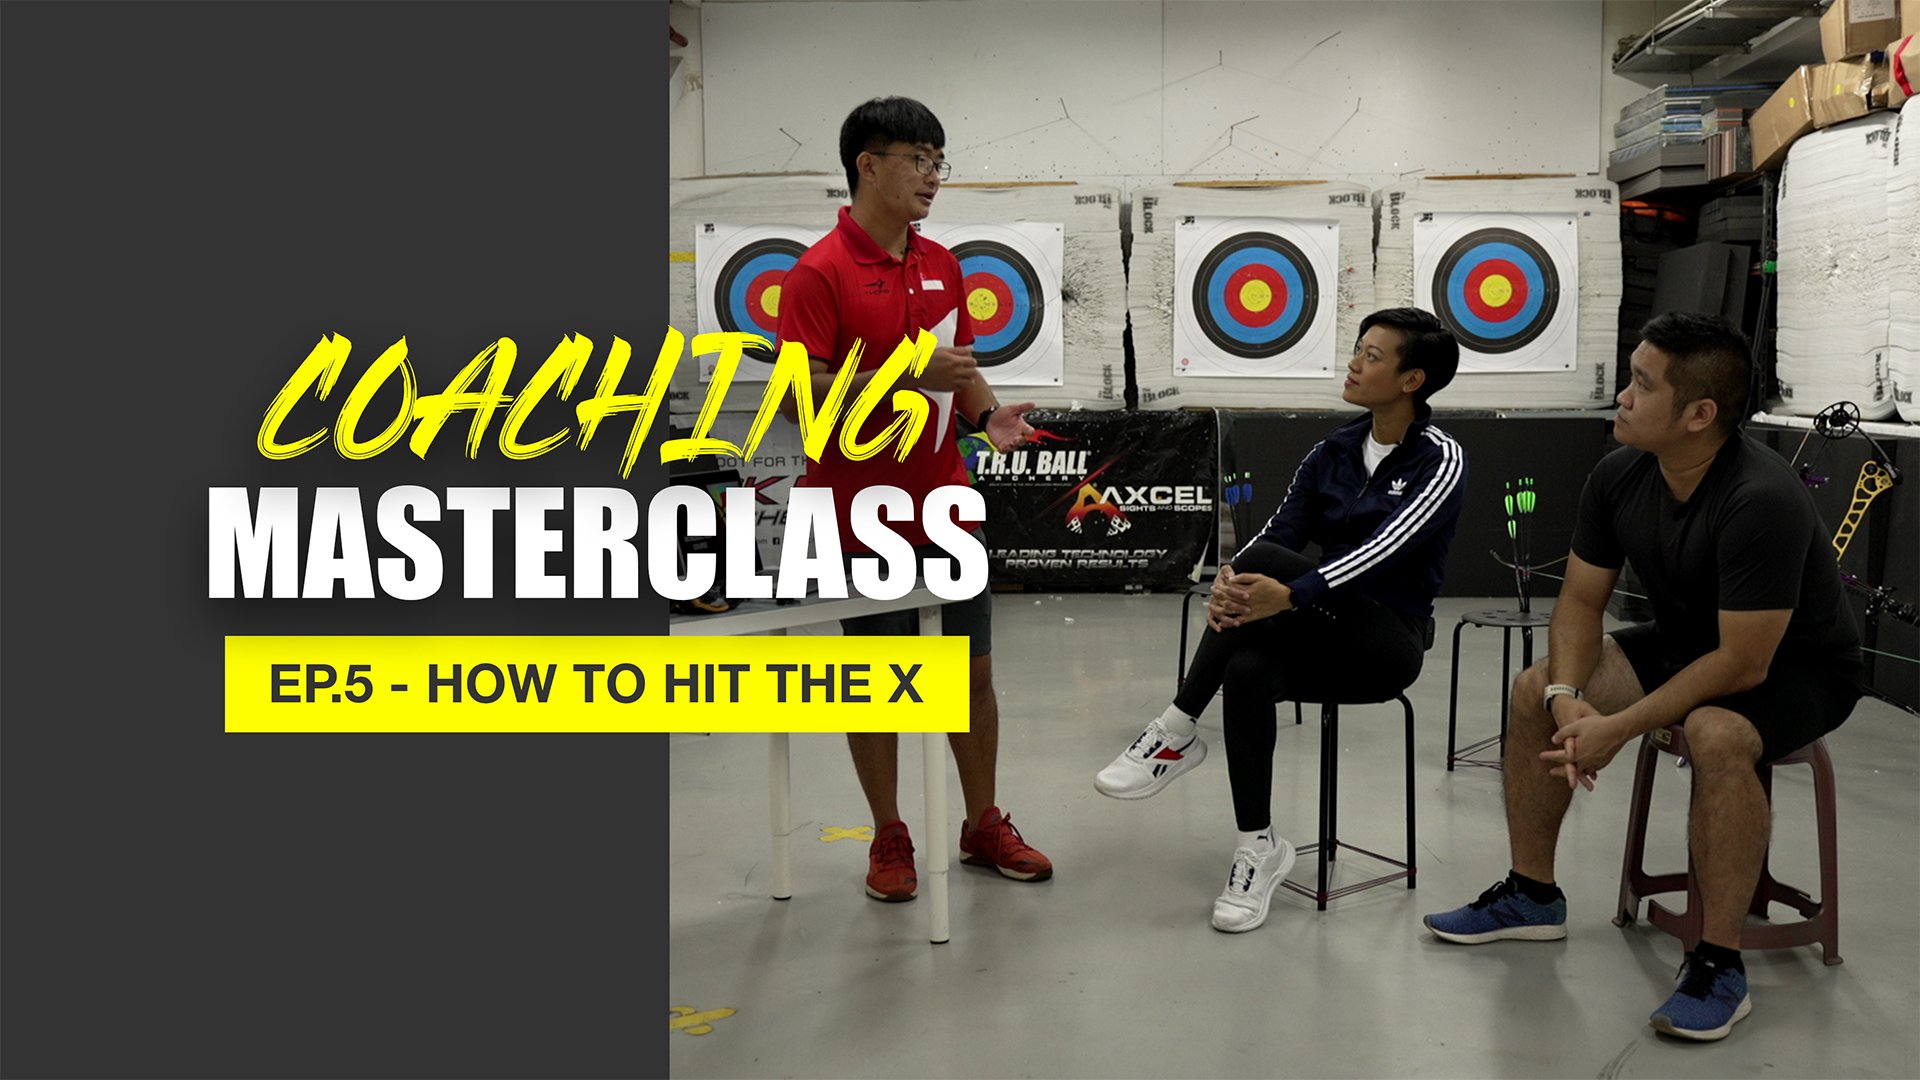 Ep 5 - How to hit the X